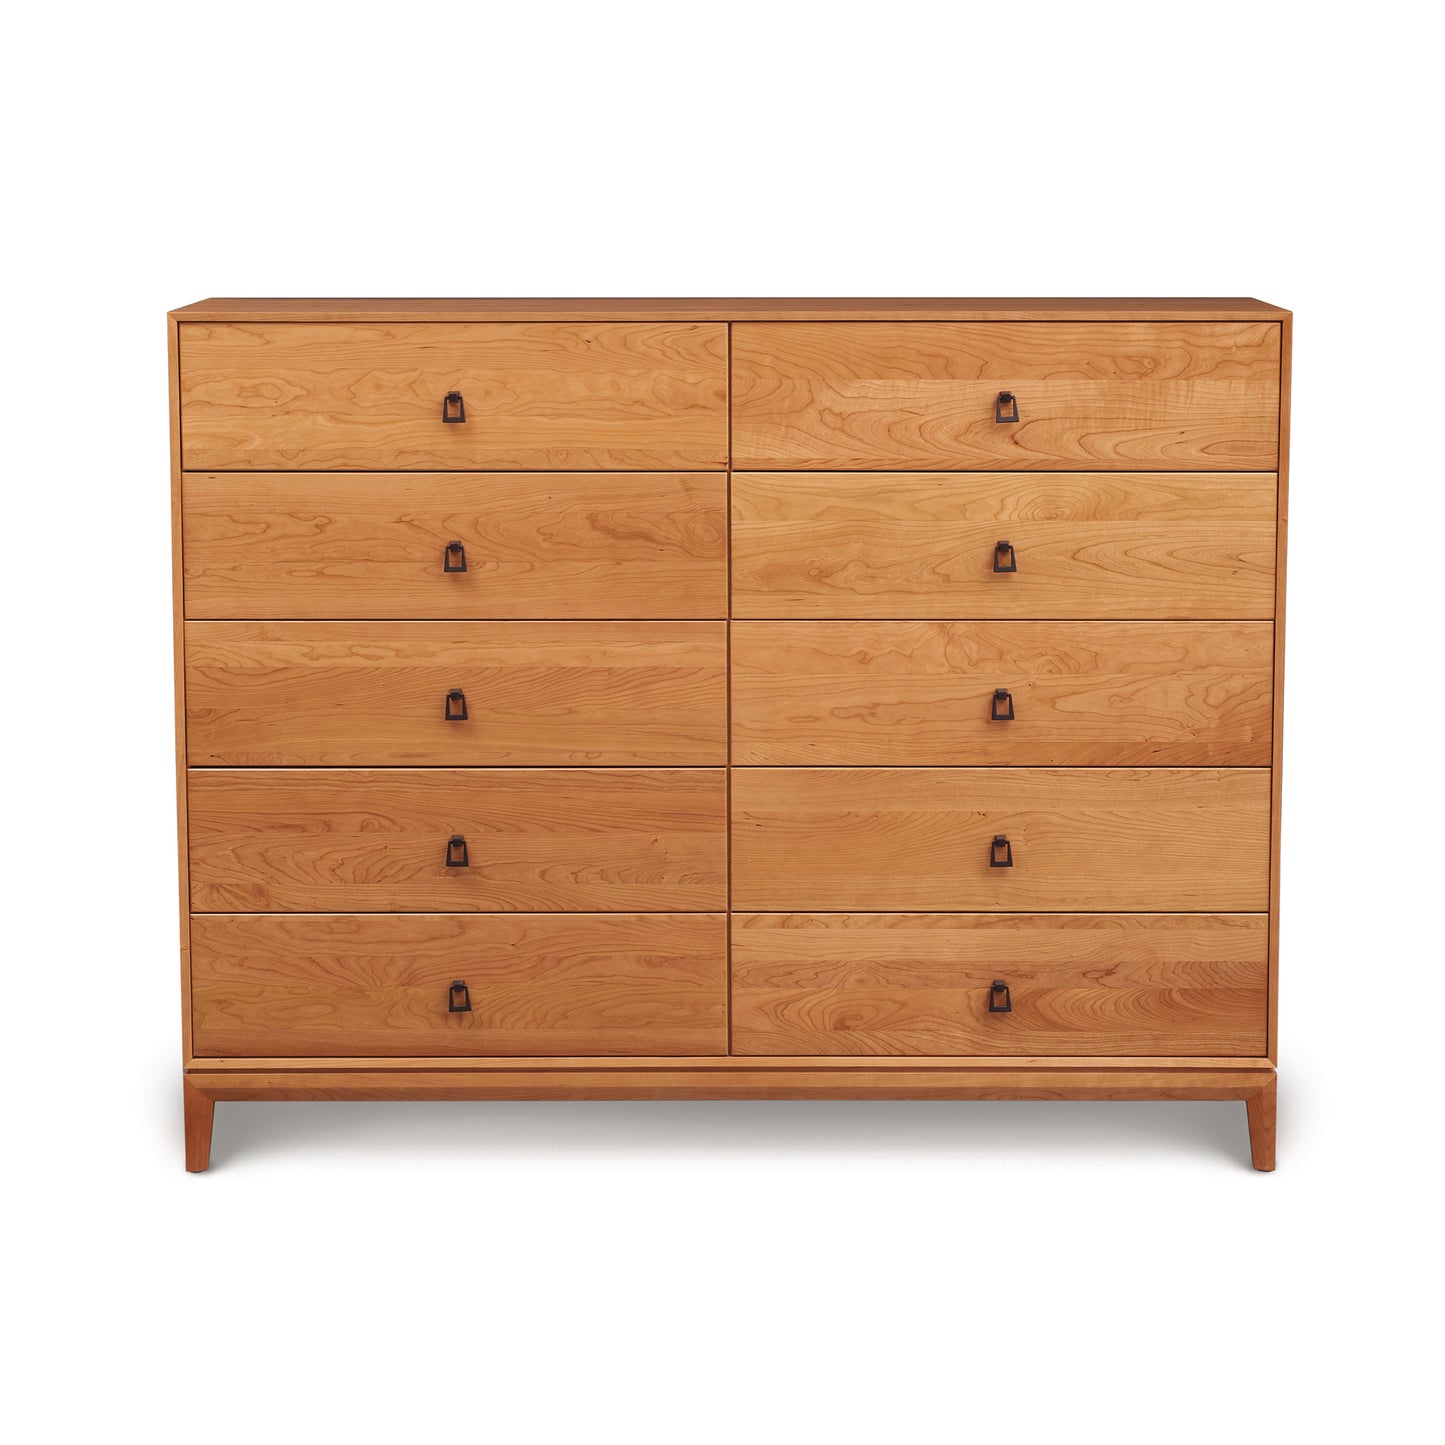 A Copeland Furniture Mansfield 10-Drawer Dresser made from sustainably harvested North American hardwood, with simple handles against a white background.